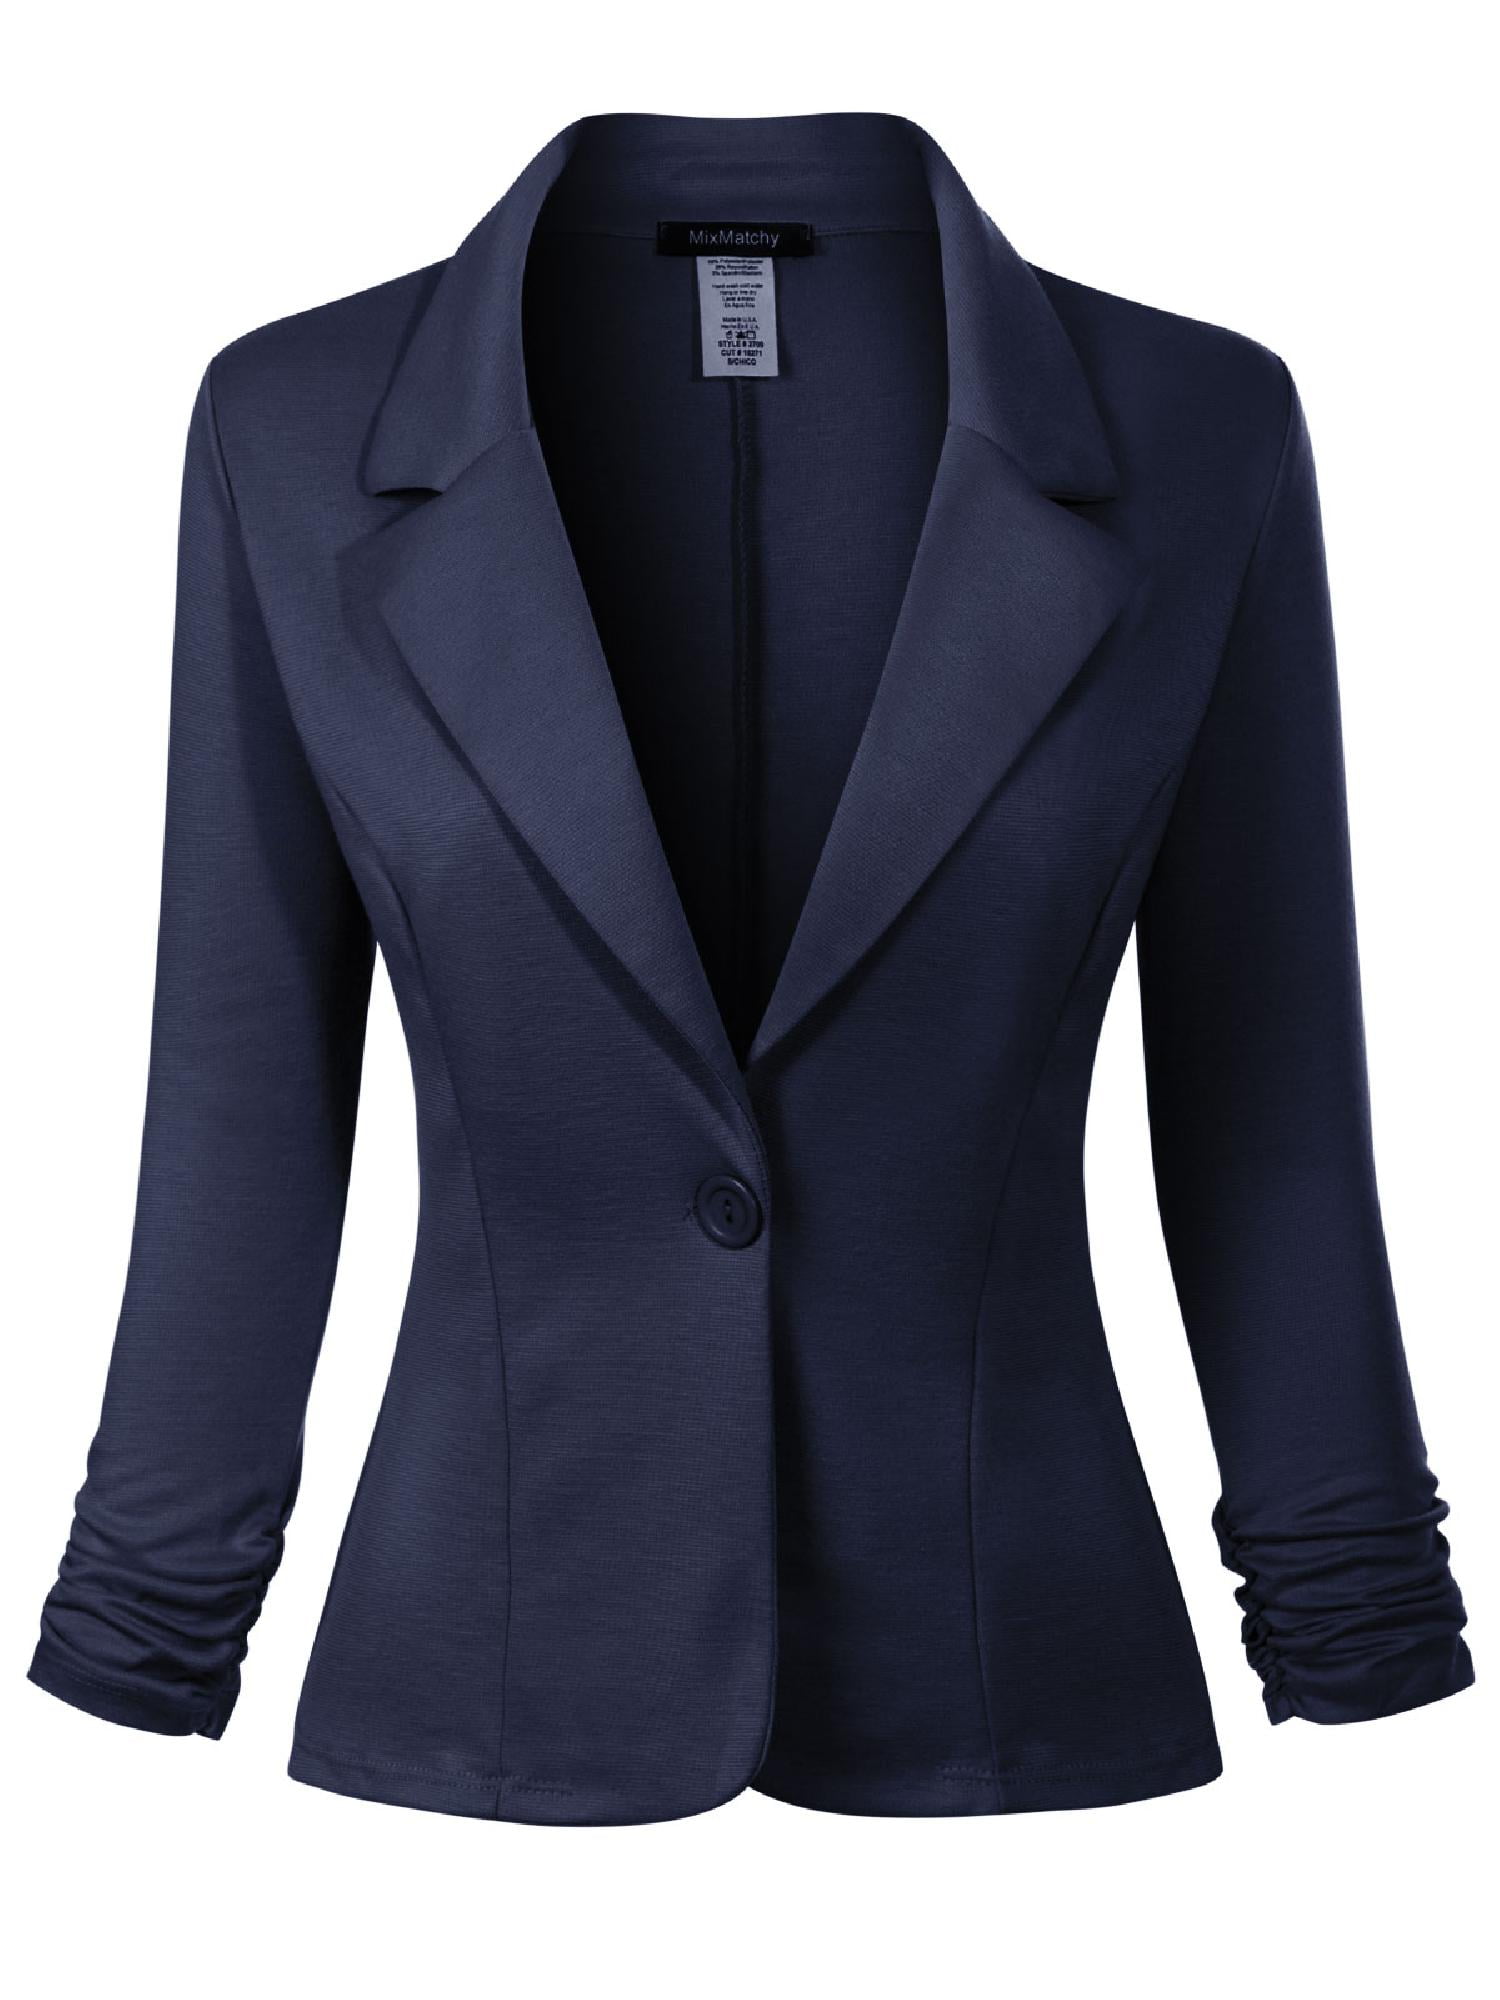 Made By Olivia Women S Classic Casual Work Solid Color Knit Blazer Navy Blue 3xl